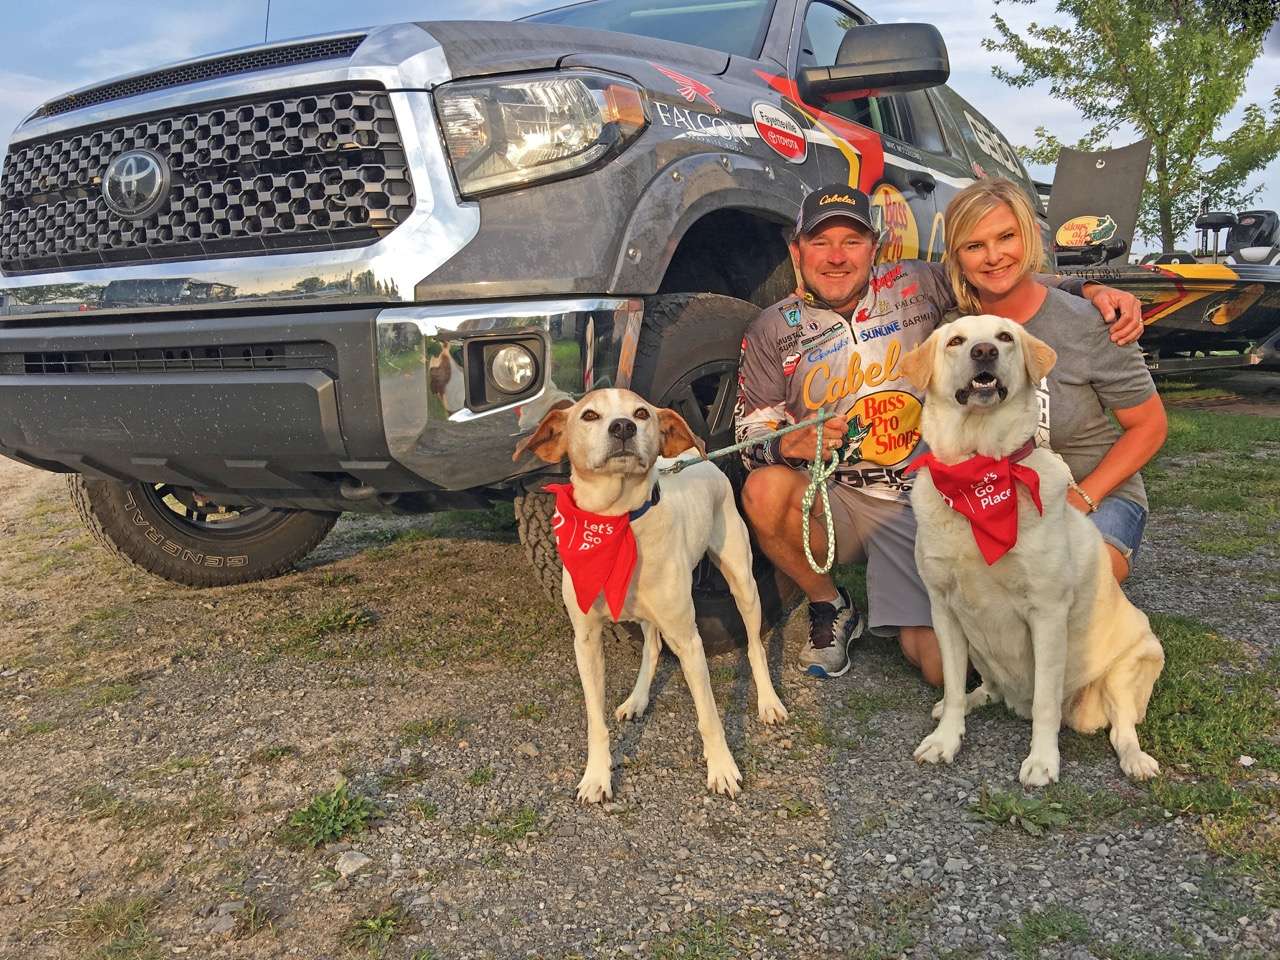 The McClellands, known by their friends as Mee Maw (Stacy) and Pee Paw (Mike) have been living fulltime on the road in their 5th wheel, and Bullseye and Lacey are always a part of their travelin road show.
